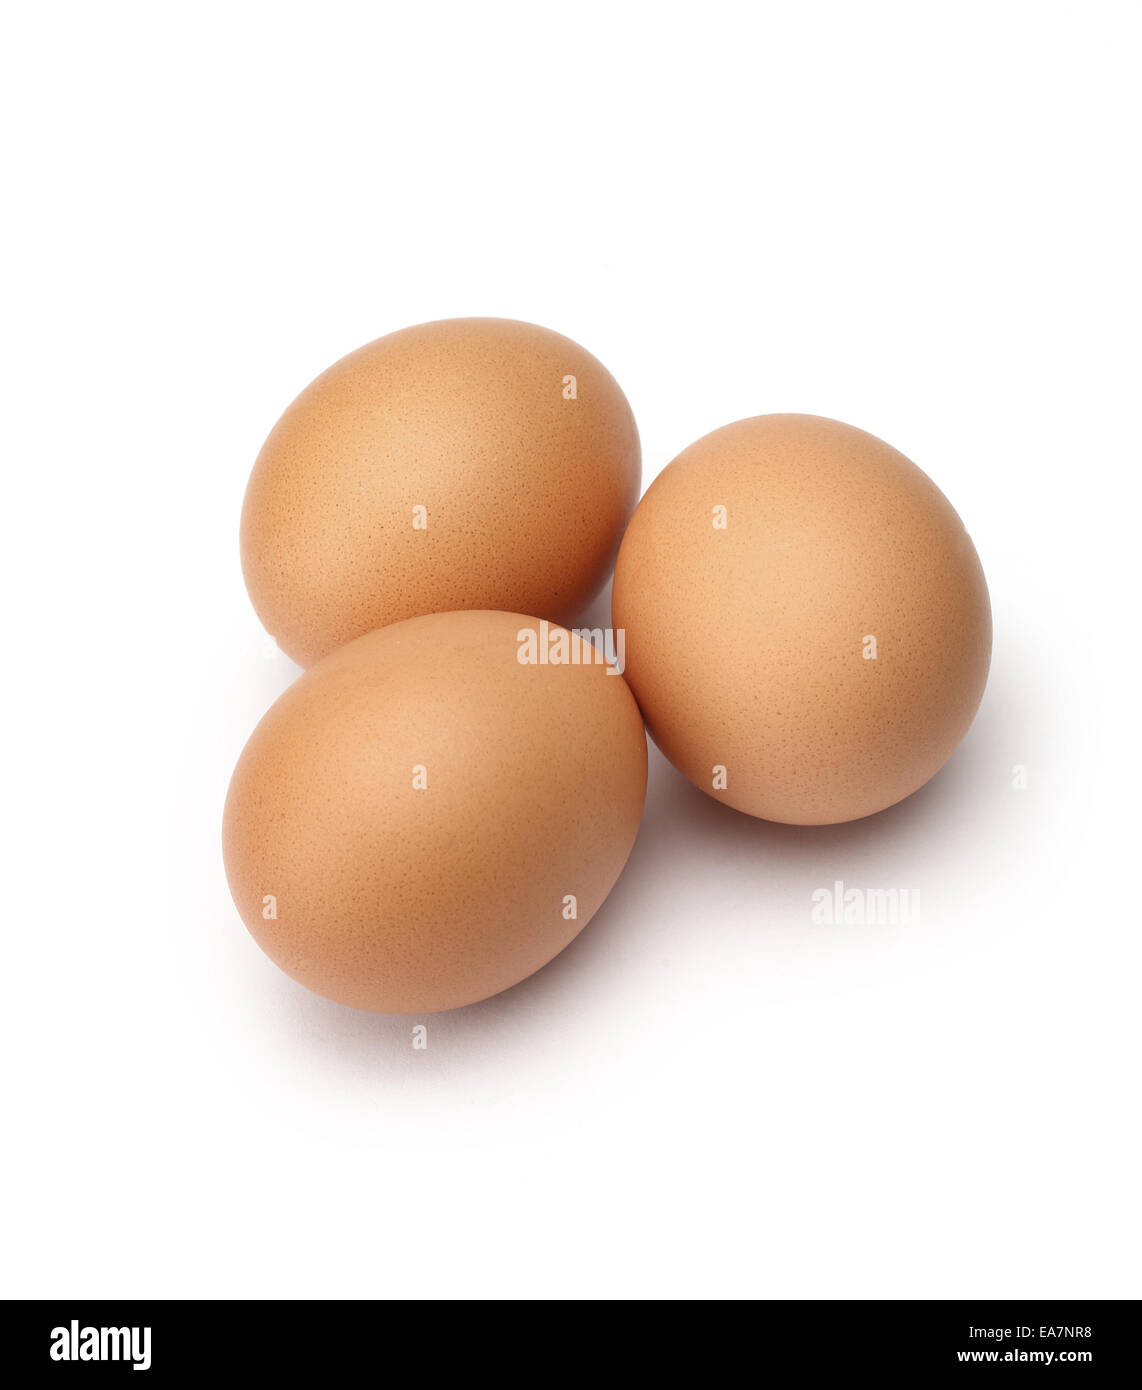 Sort eggs stacked vertically isolated on white background Stock Photo